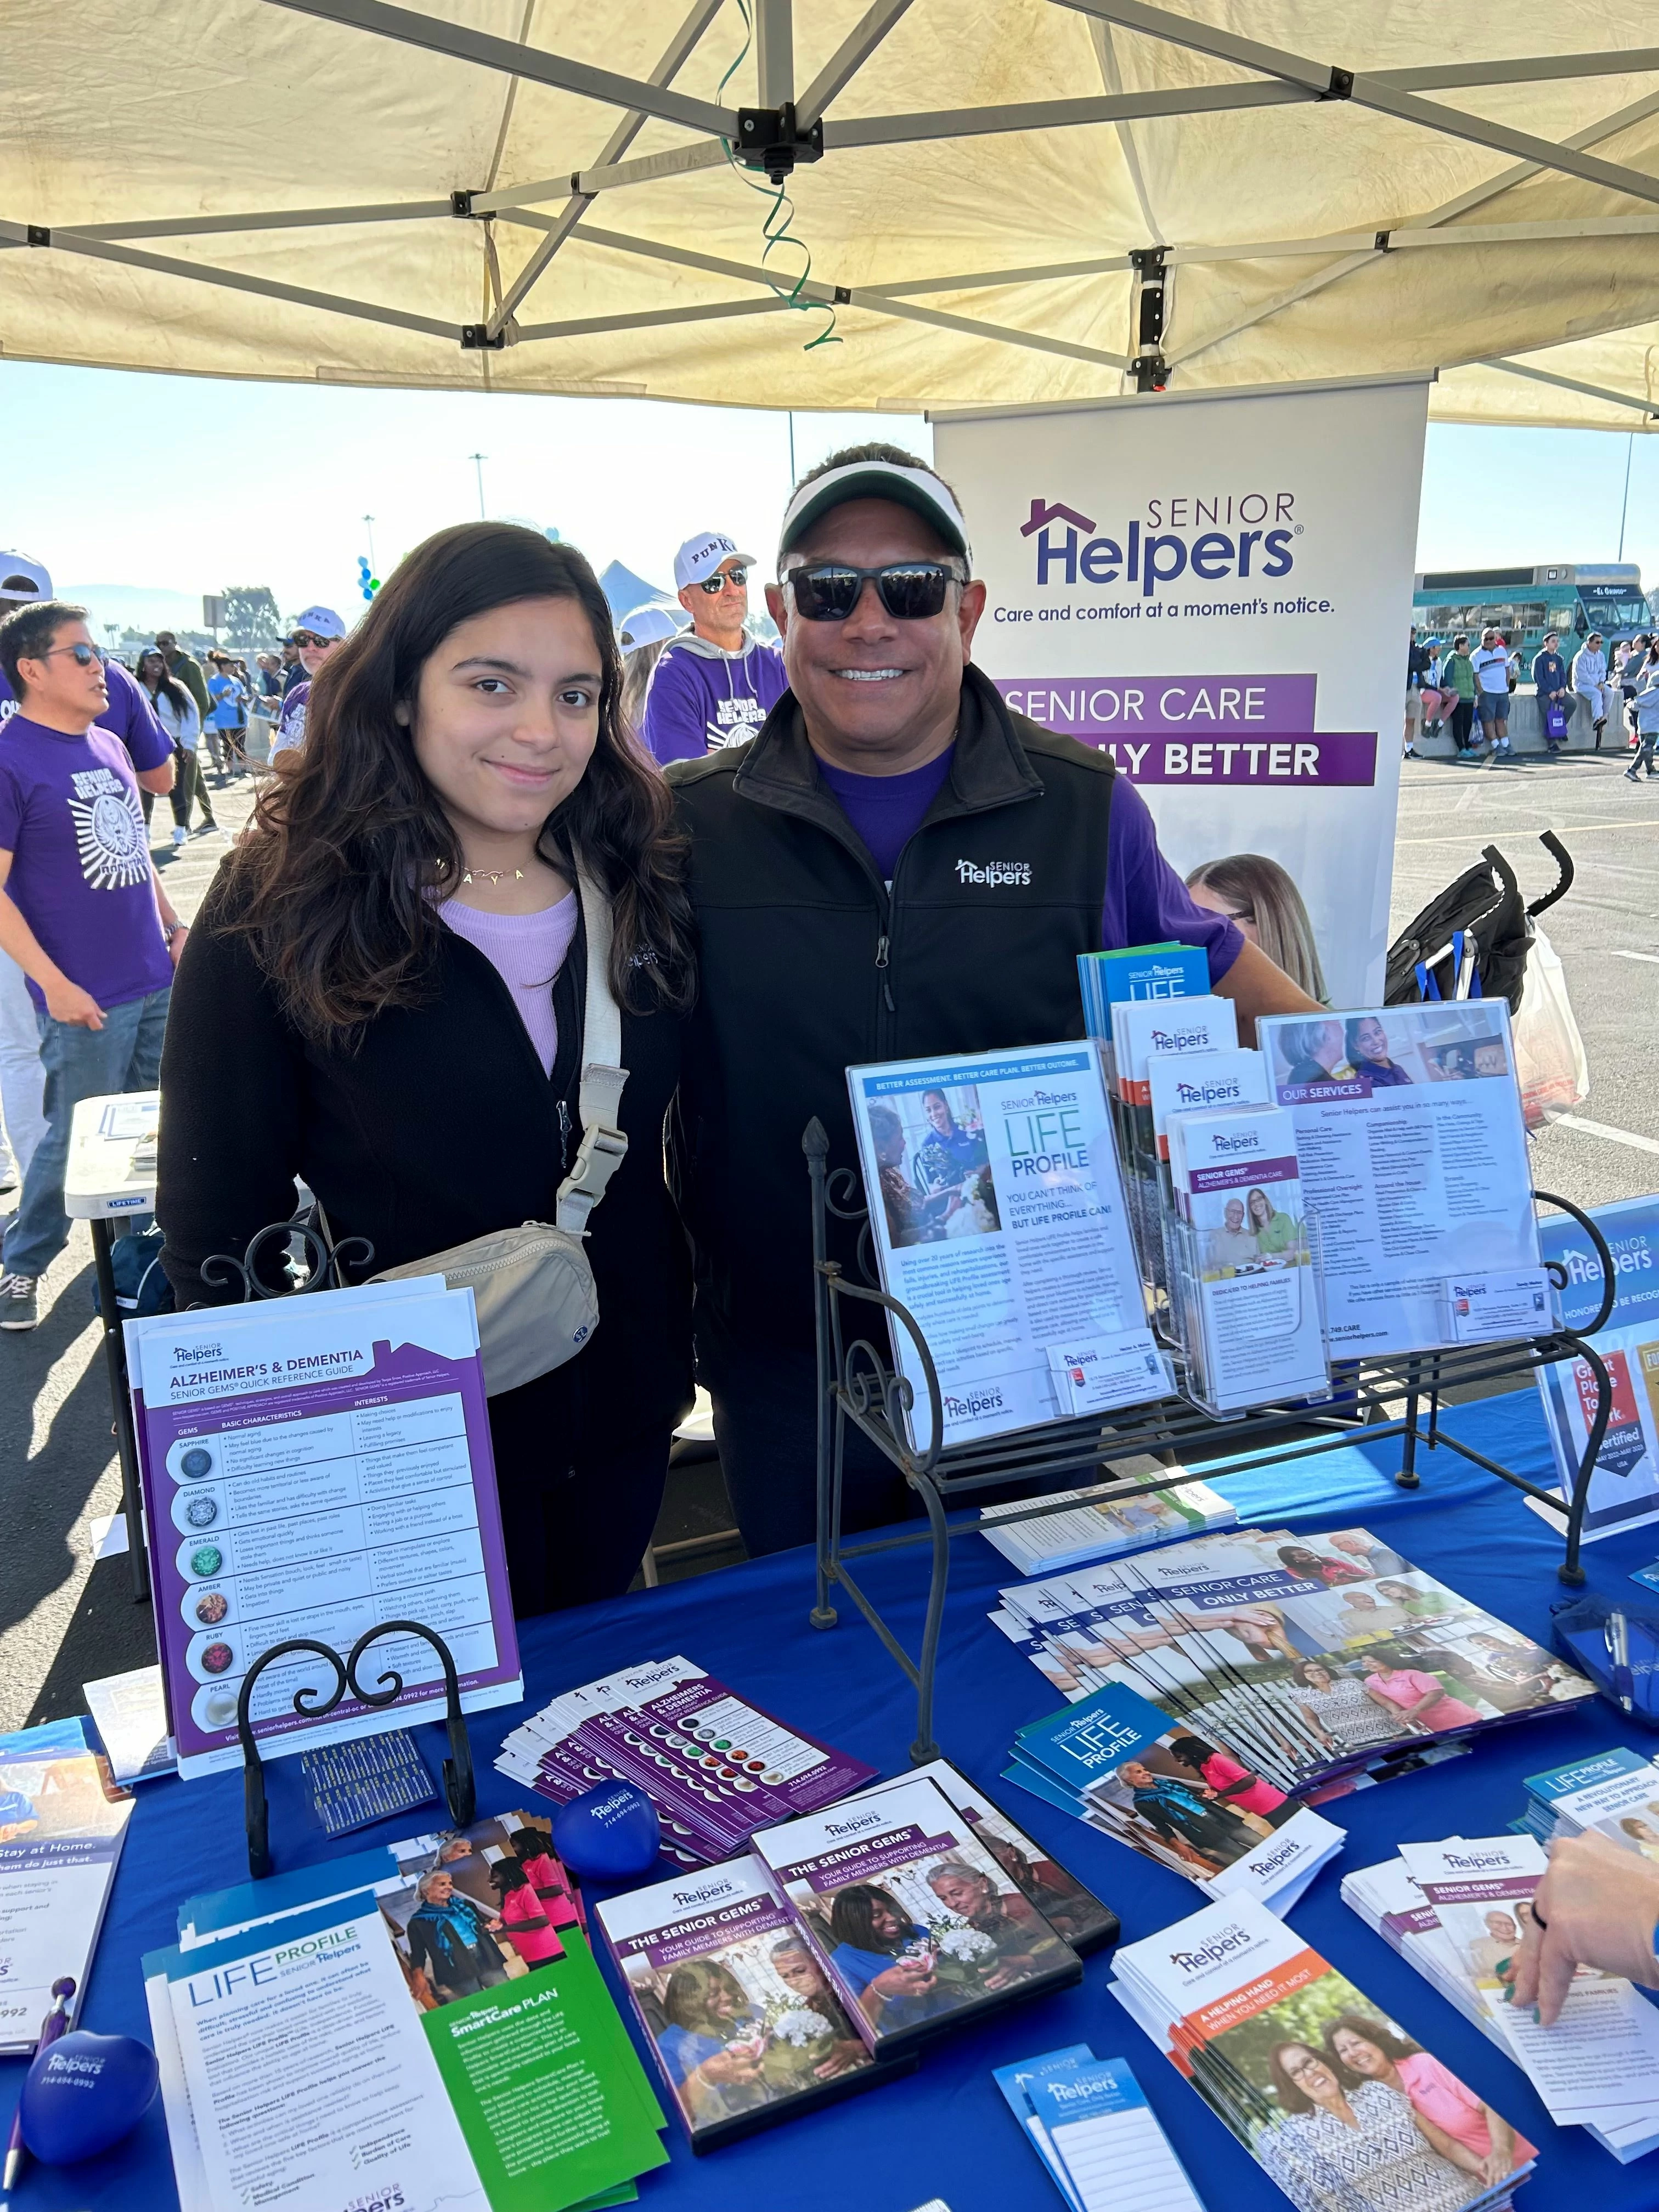 Another strong Senior Helpers showing at the Alz OC Walk. Working together we will ultimately find a cure for Alzheimer’s and Dementia. Here we are with renowned Cognitive Disease expert Dr. Dung Trinh, Senior Helpers of South OC Office Assistant Maya Munoz, and the rest of the Senior Helpers team from Orange County.